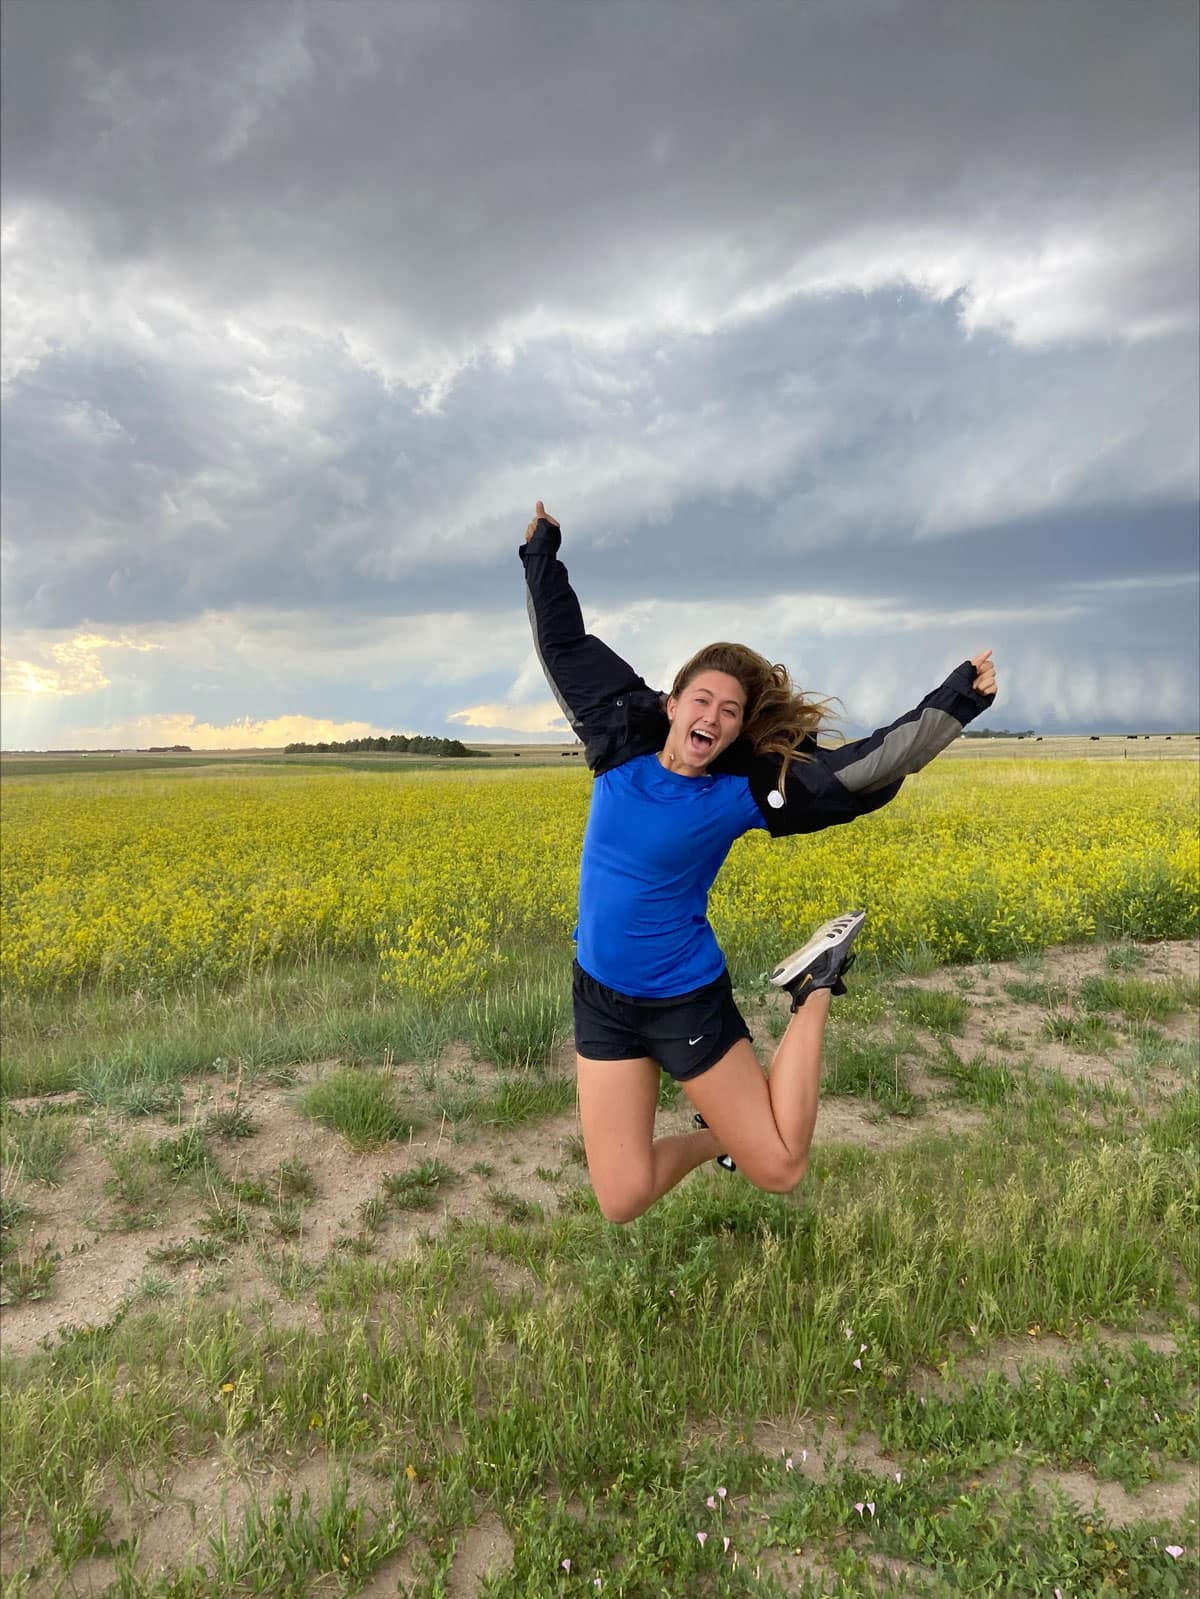 Woman jumps as a storm rolls in.